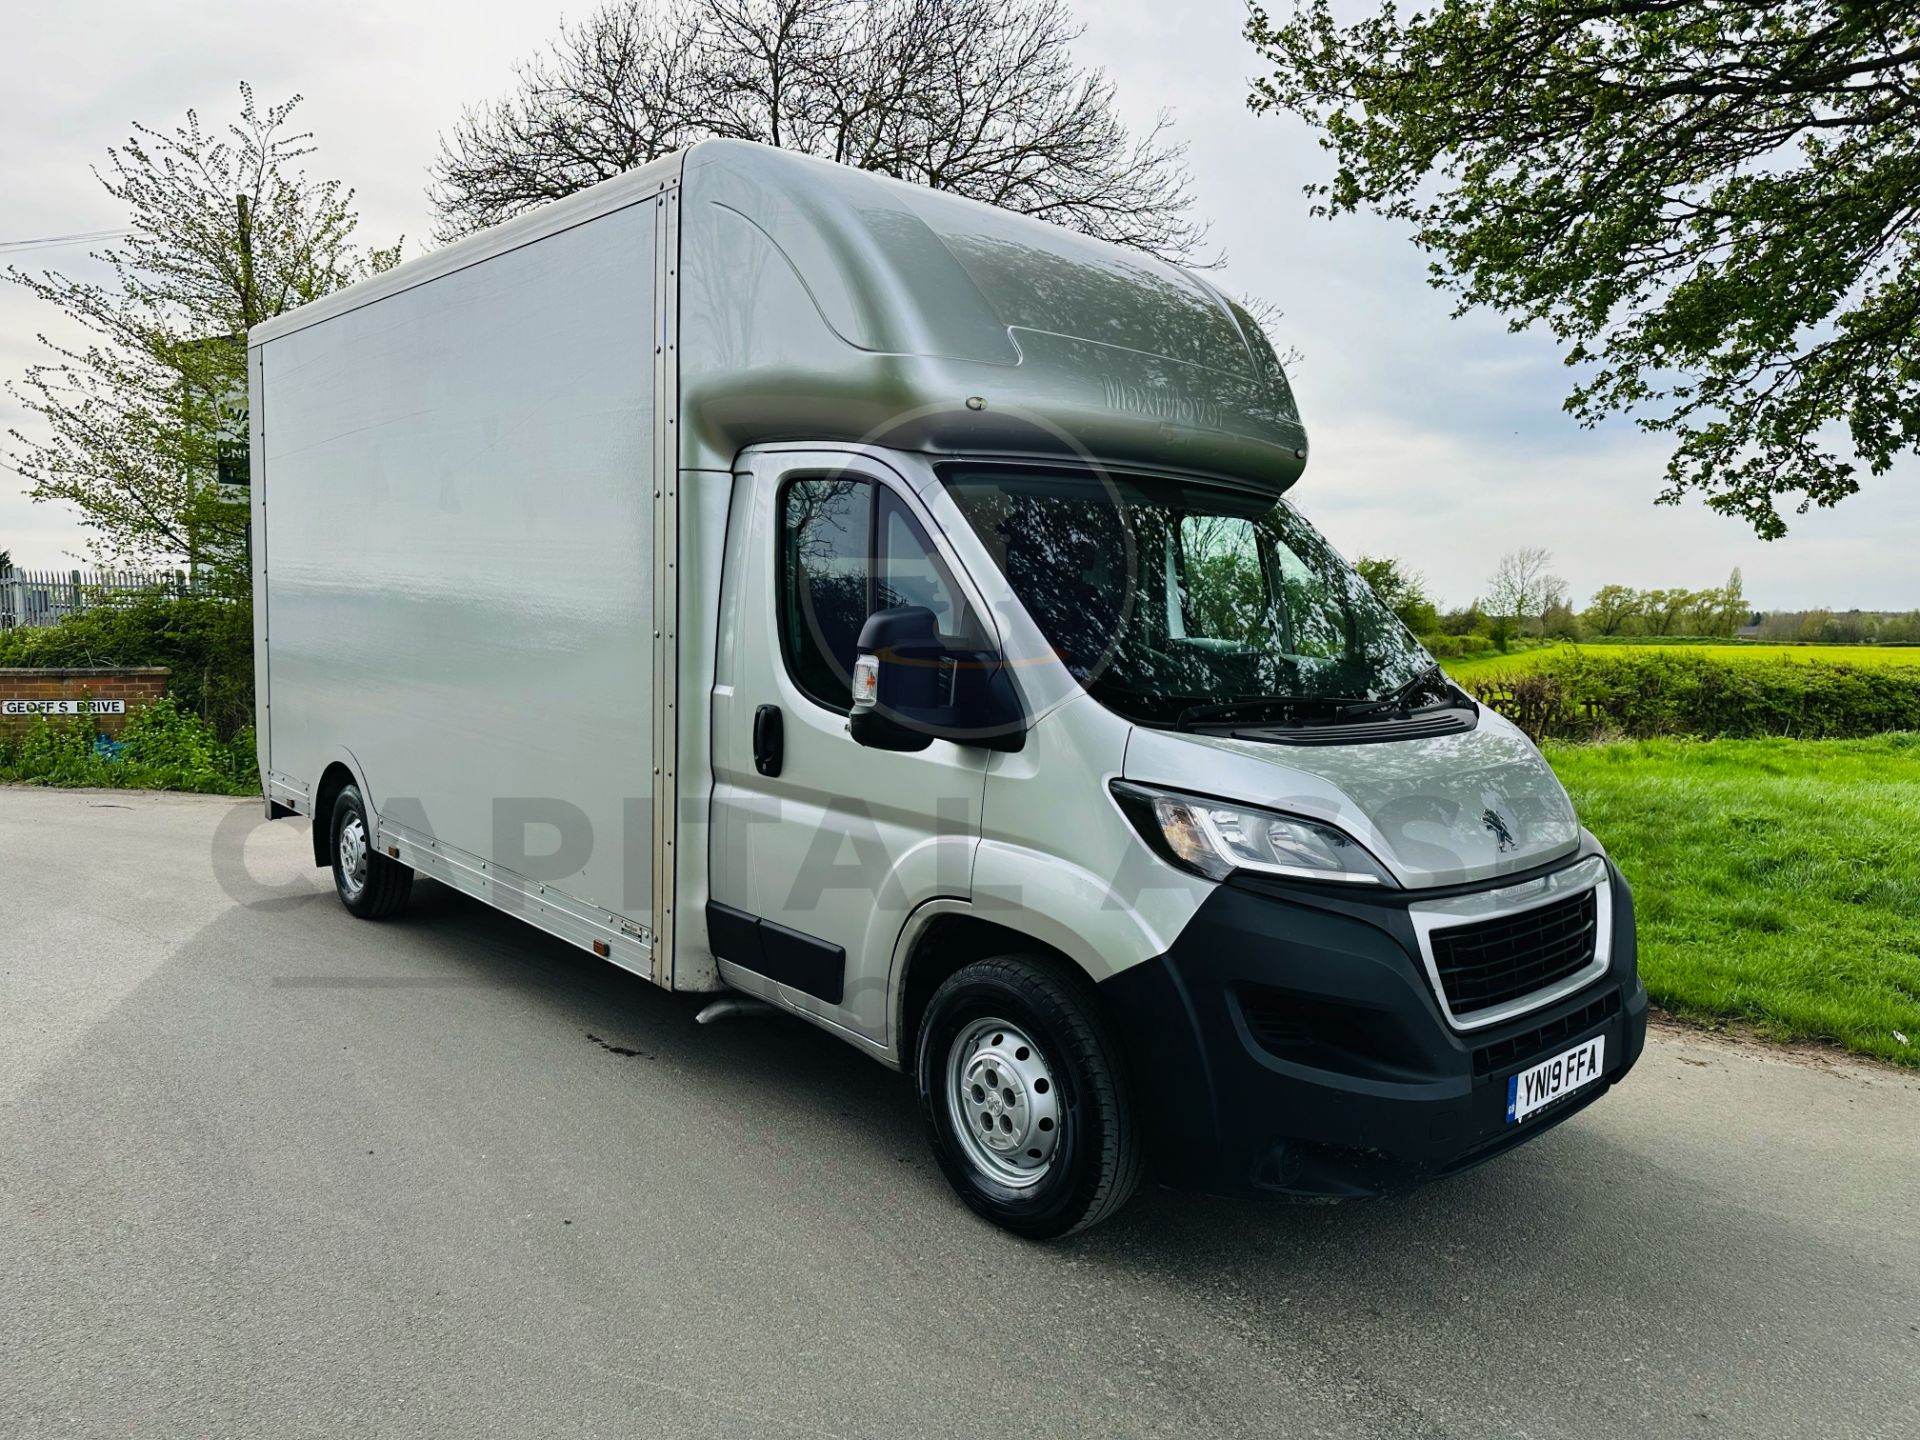 (ON SALE) PEUGEOT BOXER 335 *LWB LOW LOADER / MAXI MOVER LUTON* (2019 - EURO 6) 2.0 BLUE HDI *A/C* - Image 2 of 27